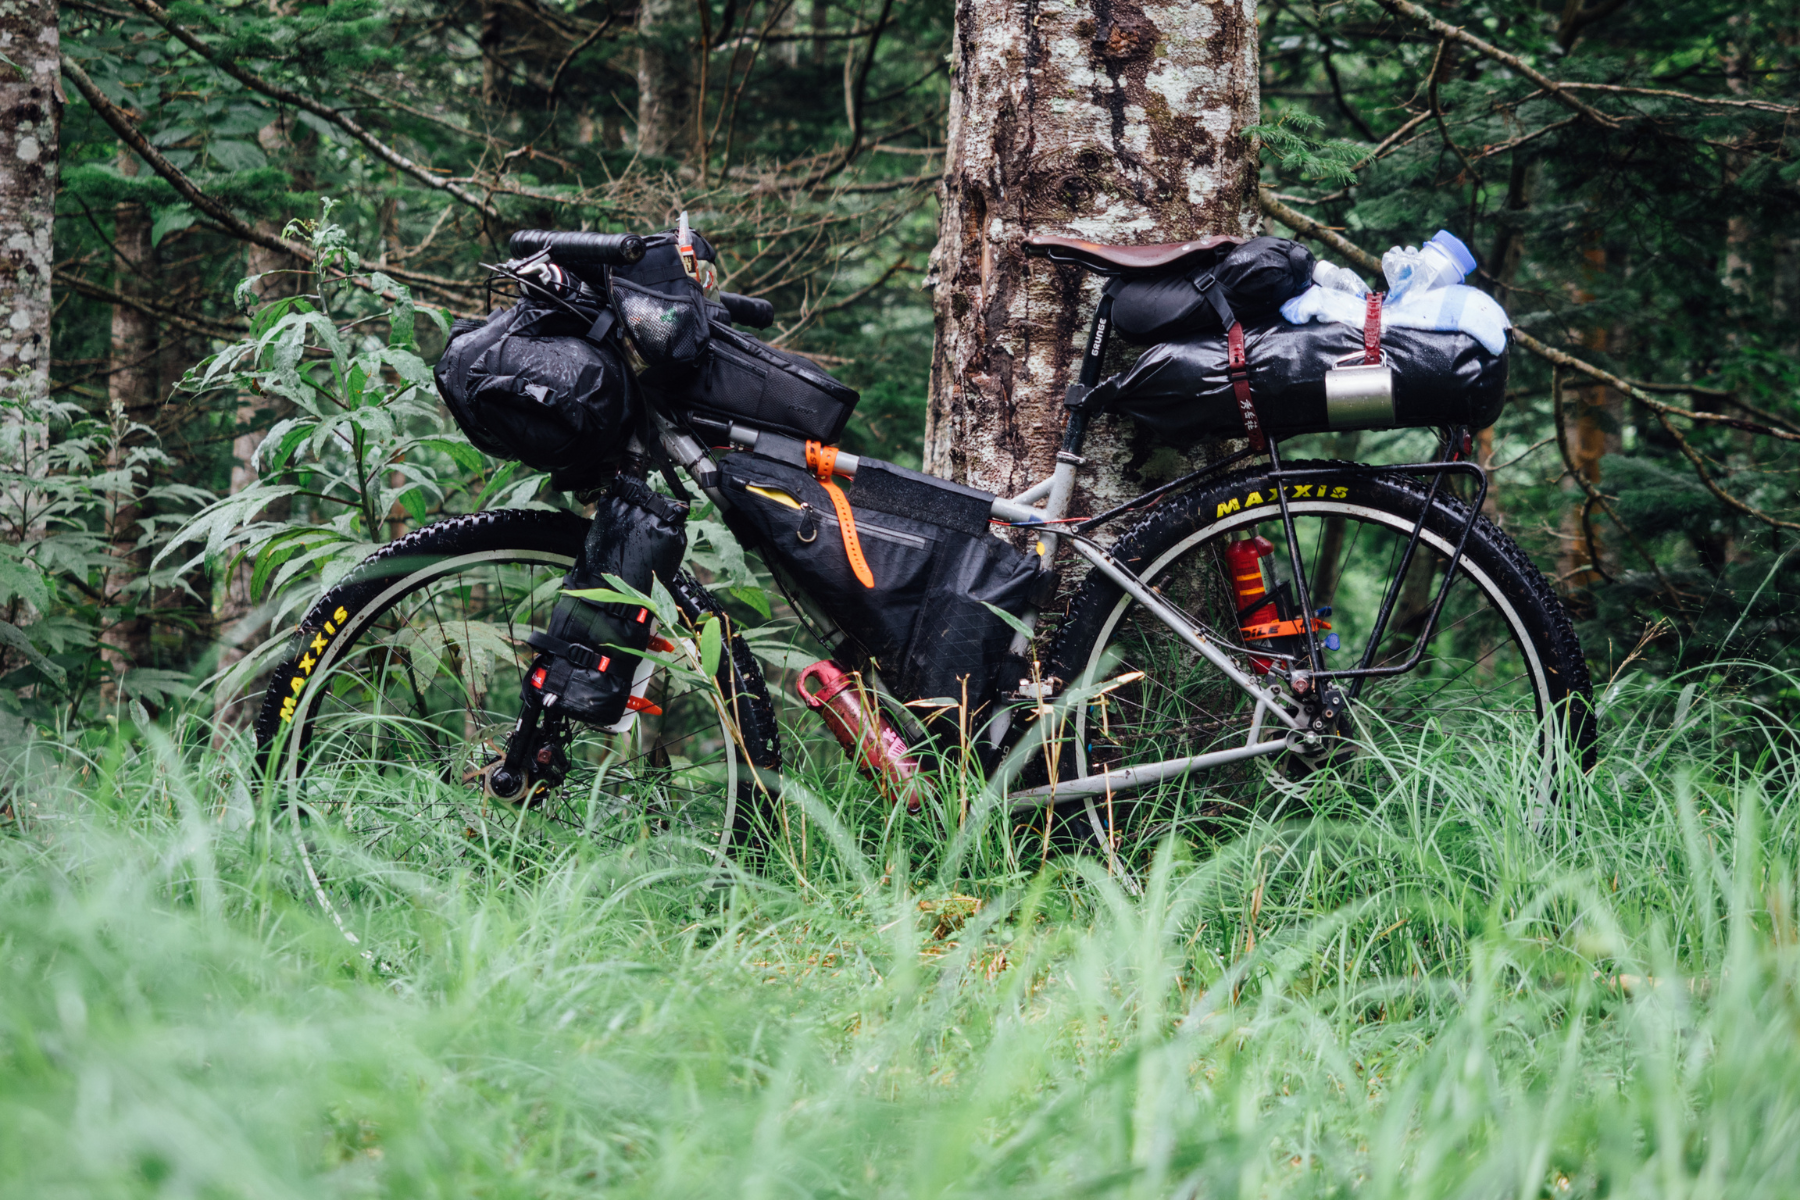 A bike laden with luggage leaning against a tree in a forest